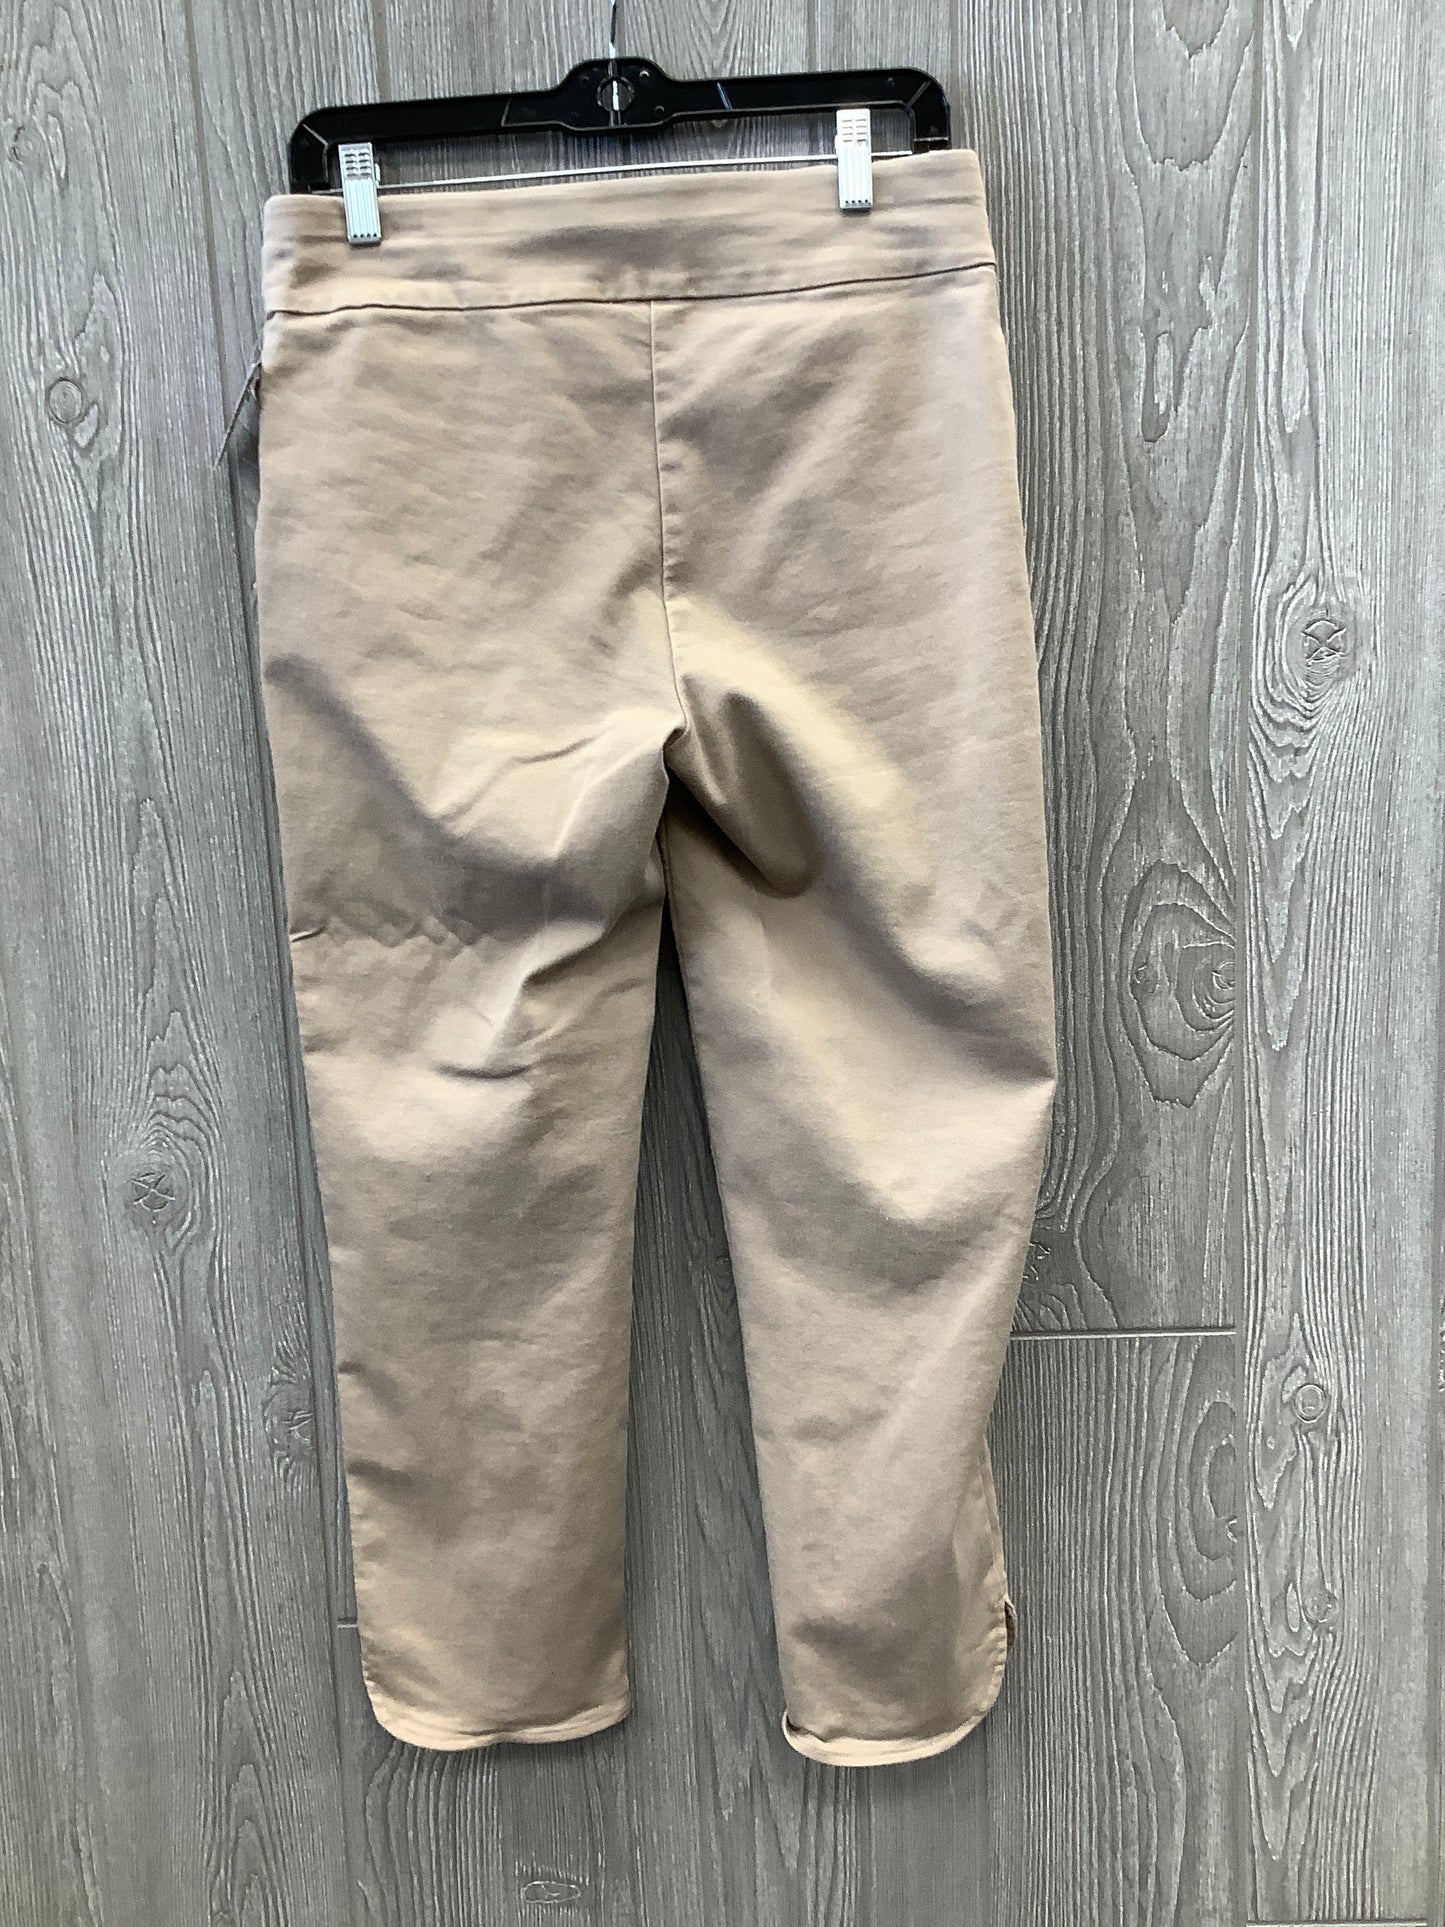 Tan Pants Cropped Croft And Barrow, Size 8